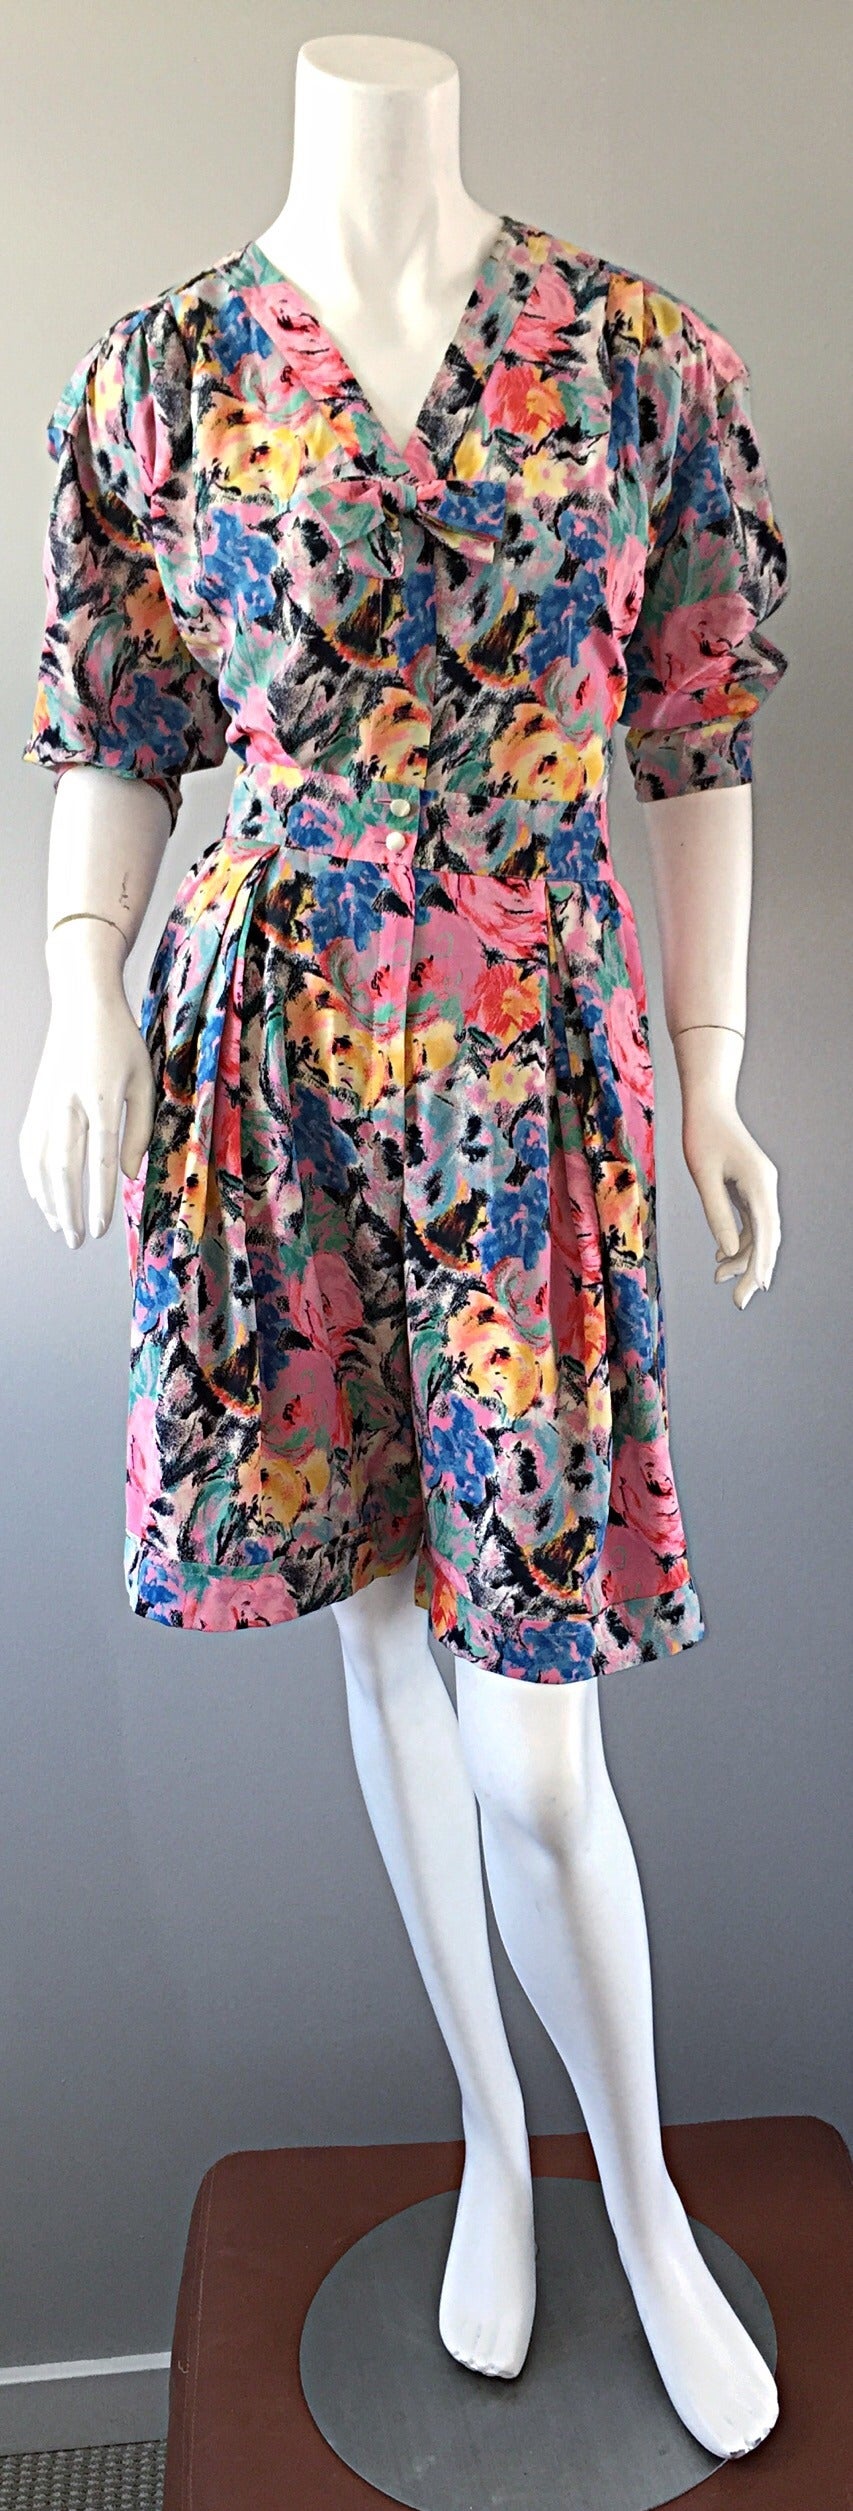 Chic vintage Emanuel Ungaro shorts ensemble! Beautiful floral watercolor print throughout. High-waisted shorts, with zipper, and double buttons at waist. Pockets at both sides of waist. Blouse features bow at bust, and slight 'puff' sleeves. Great